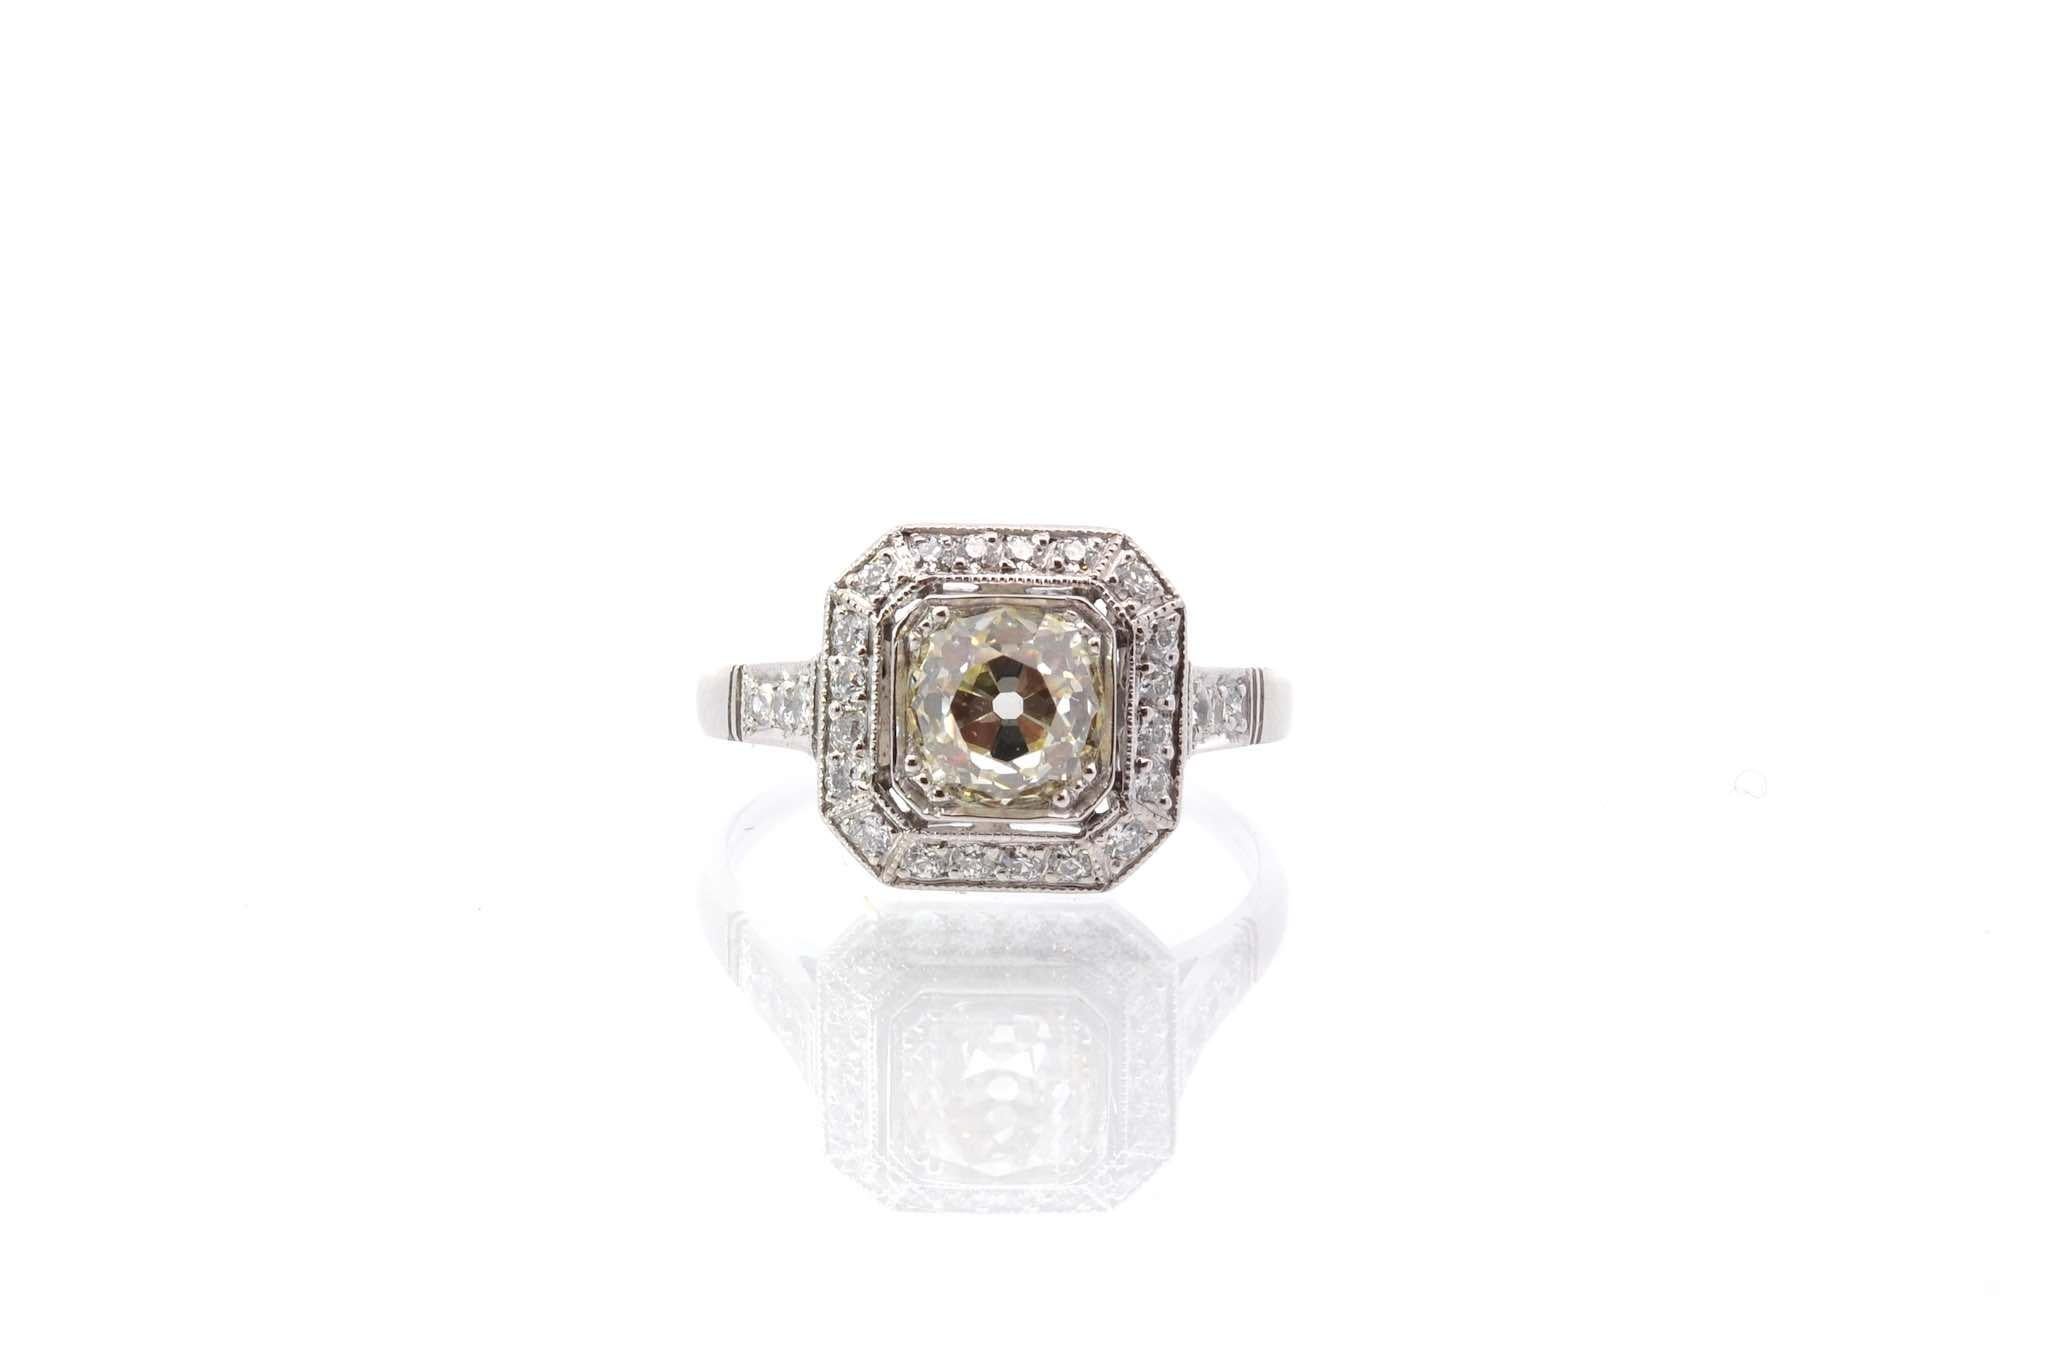 Stones: Old cut diamond of 1.02 cts SI2 / G and diamonds: 0.35 ct
Material: Platinum
Weight: 5.2g.
Period: Recent handmade art deco style
Size: 53 (free sizing)
Certificate
Ref. : 24971 - 25156